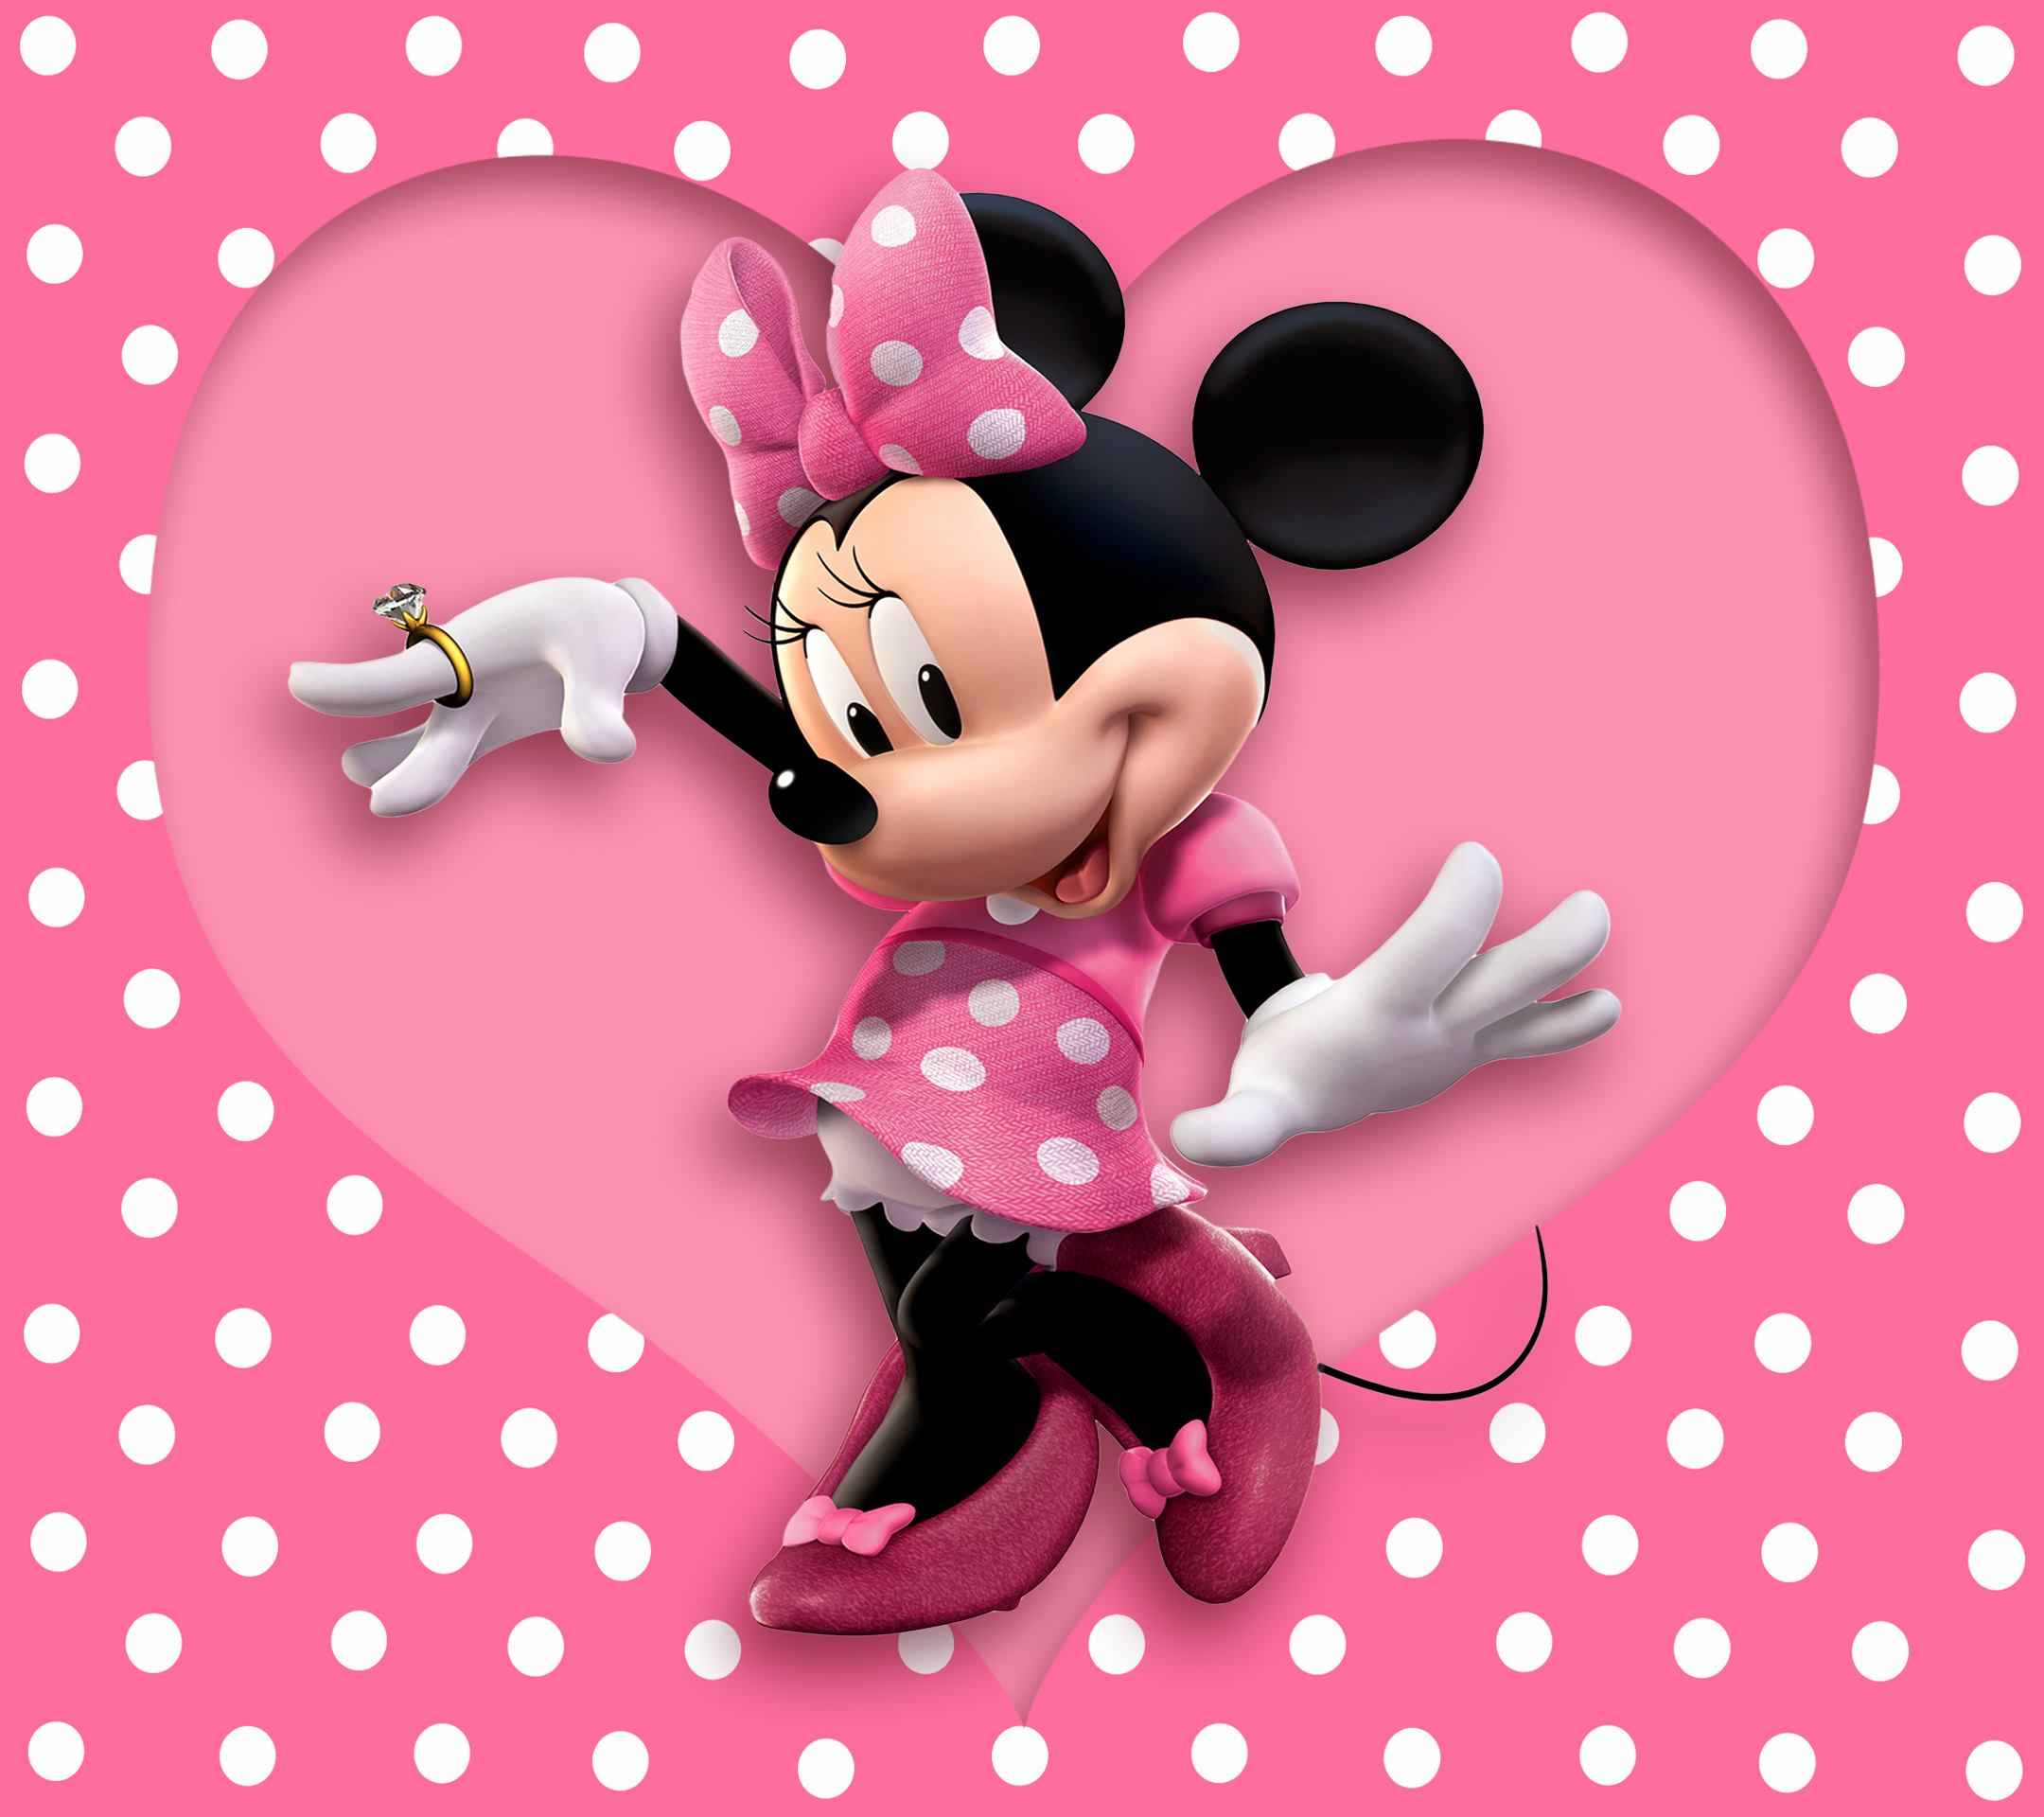 Gallery For gt Minnie Mouse Wallpaper